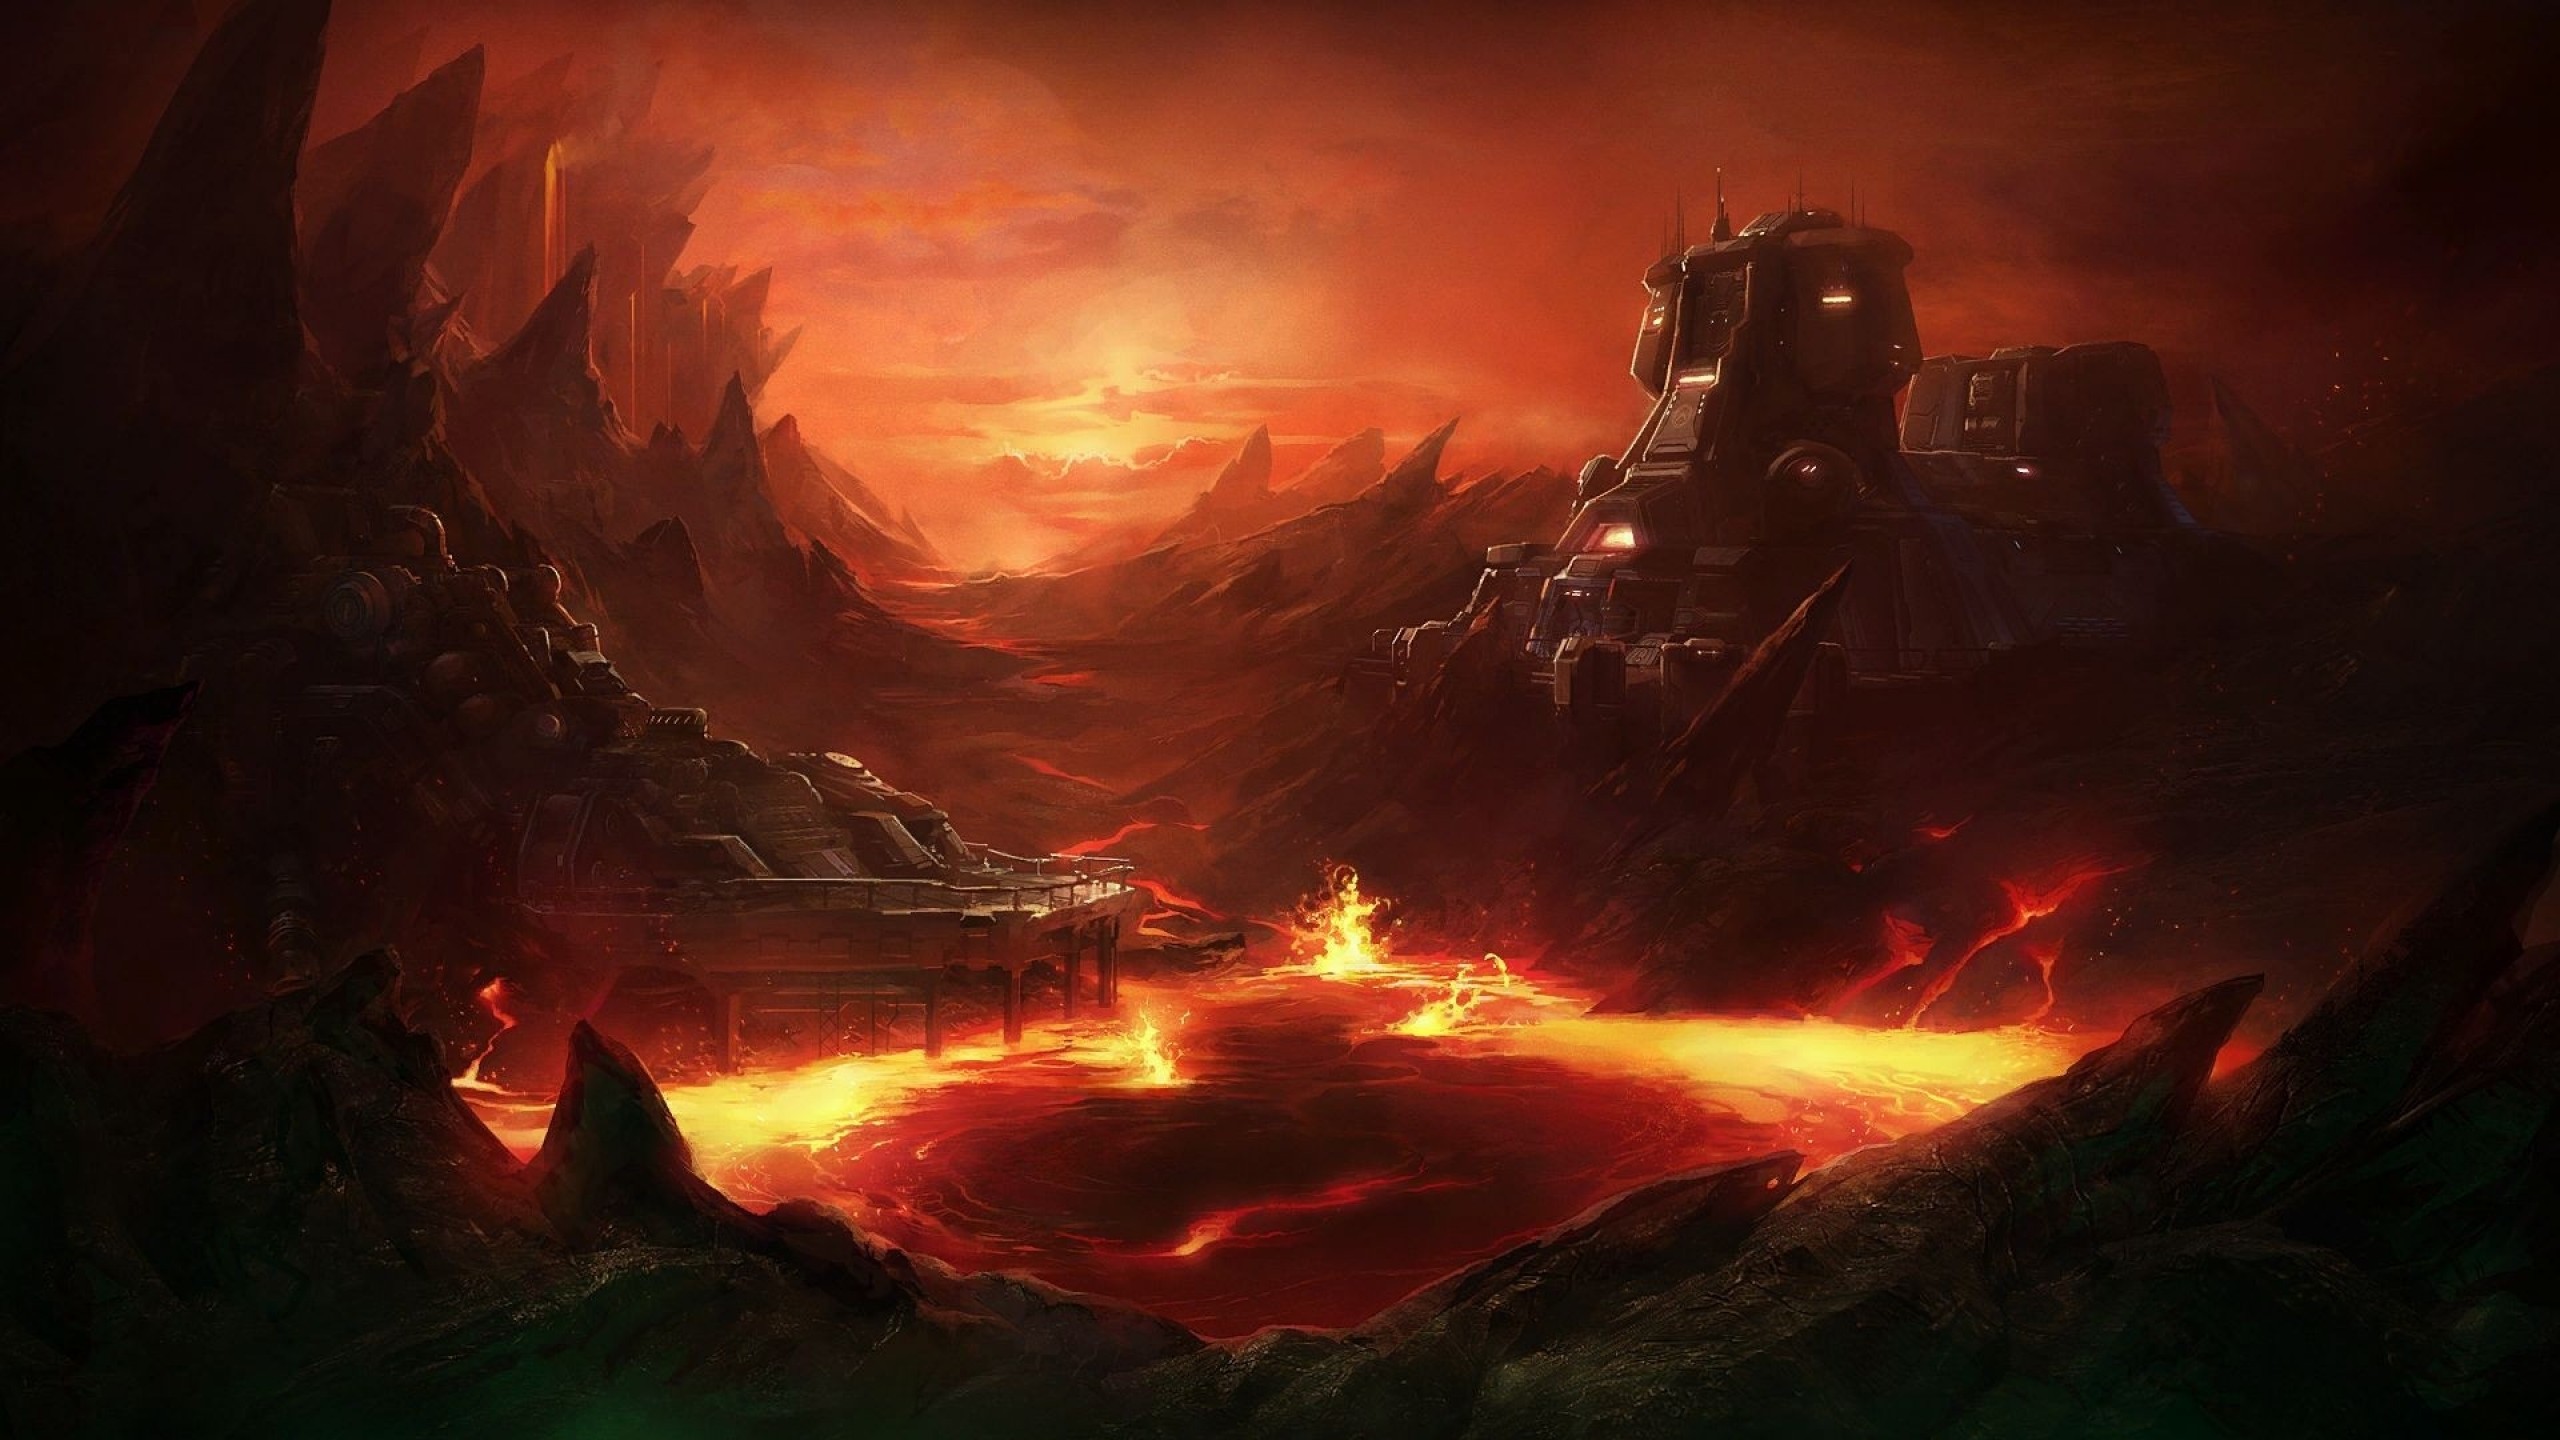 2560x1440 ... Fantasy Lava Wallpapers, Amazing 43 Wallpapers of Fantasy Lava .